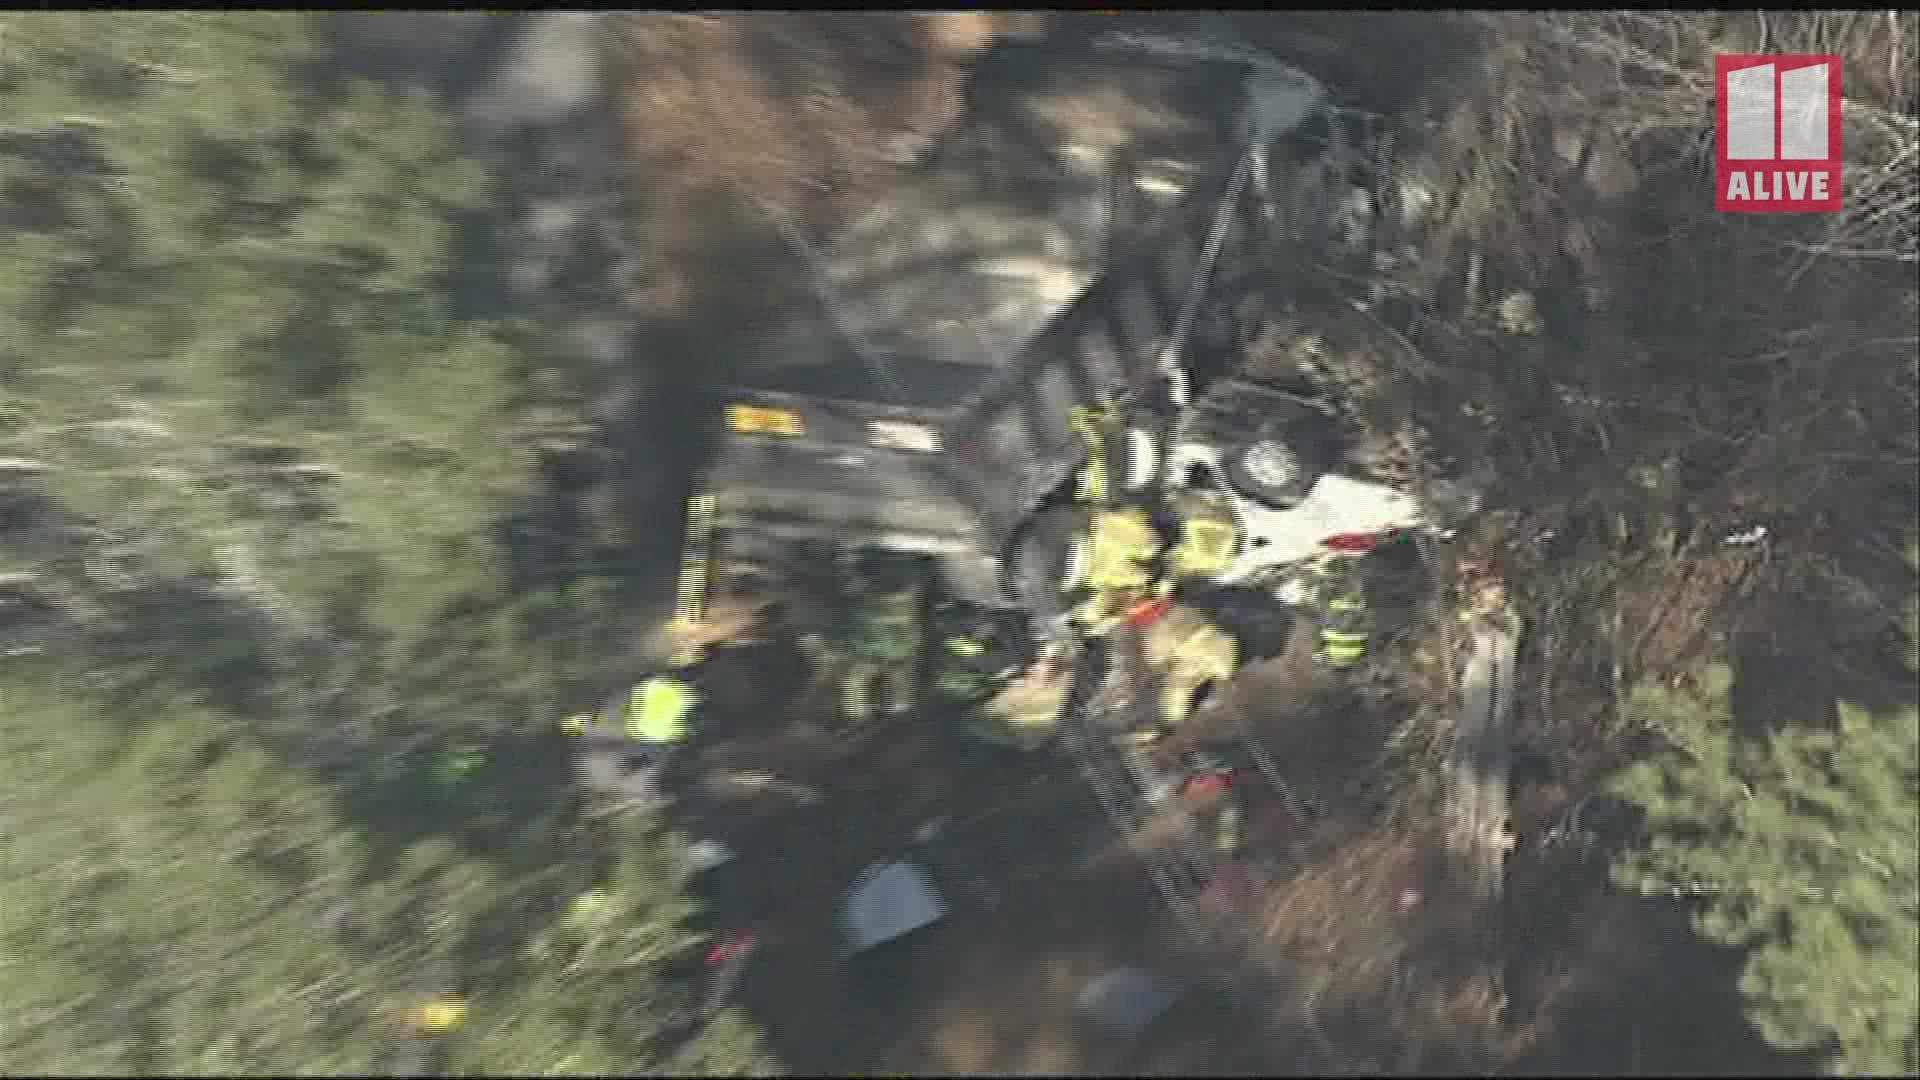 Video from 11Alive SkyTracker shows what looks like to be the dump truck on top of a vehicle and firefighters at work.